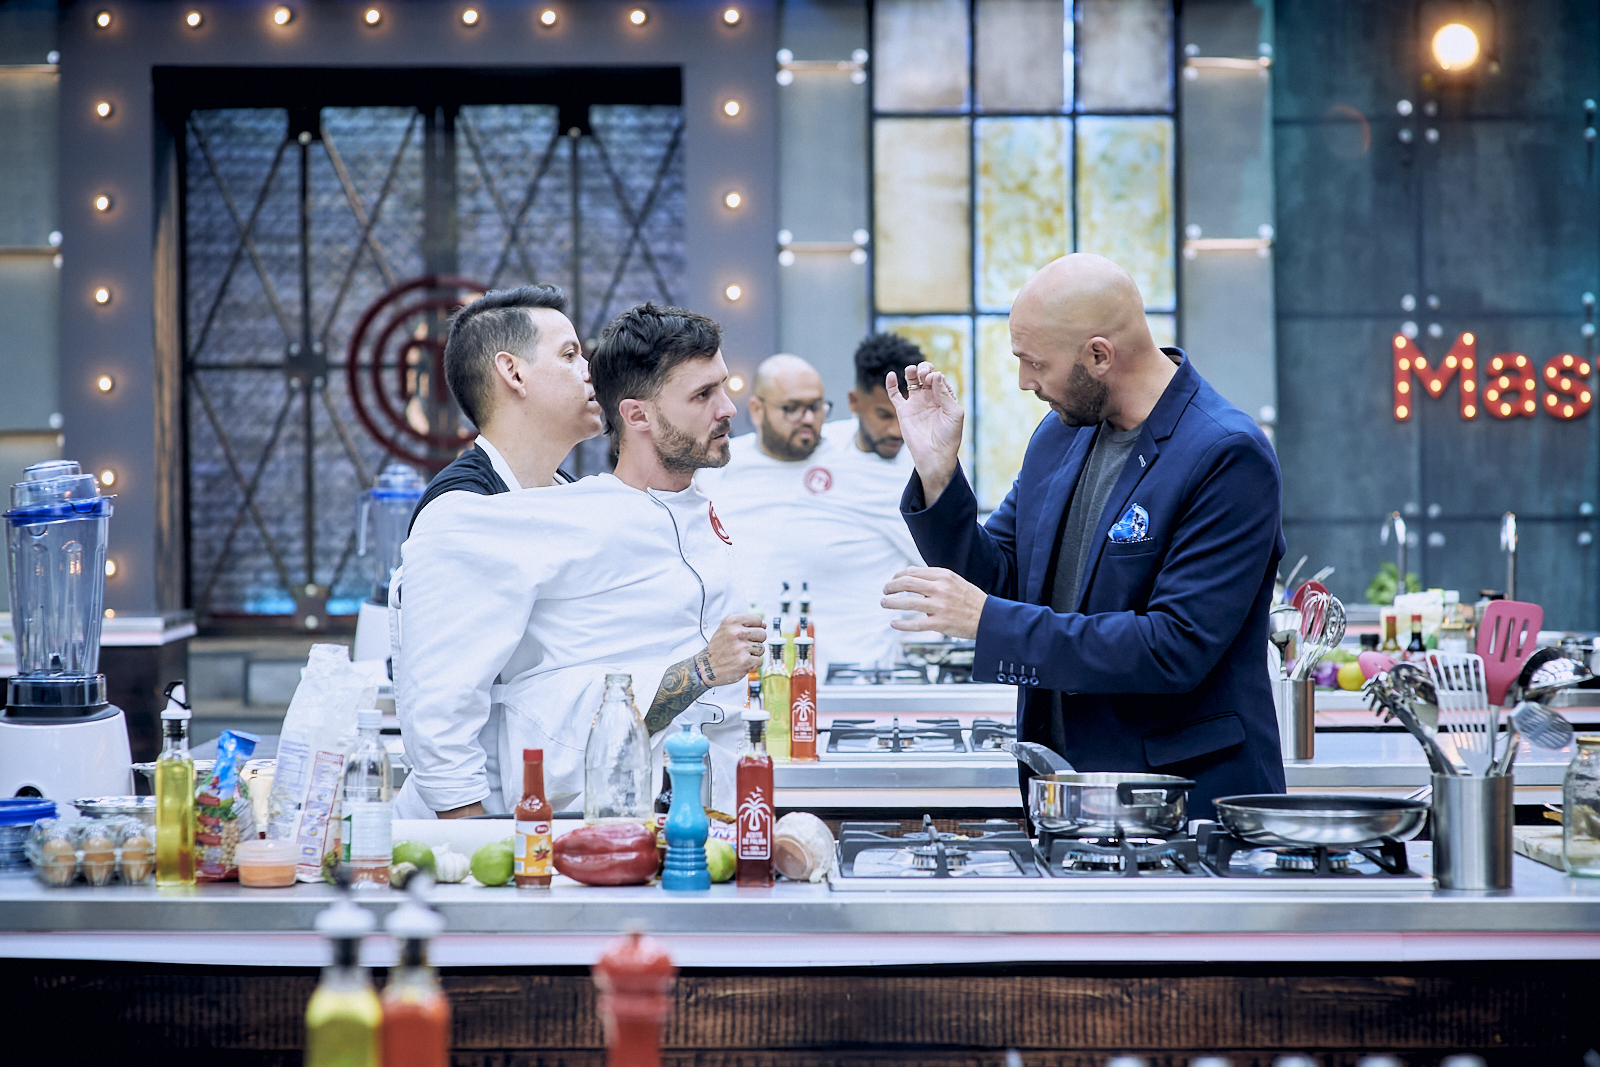 For the first time, celebrities are discovered cheating in a Masterchef Celebrity challenge